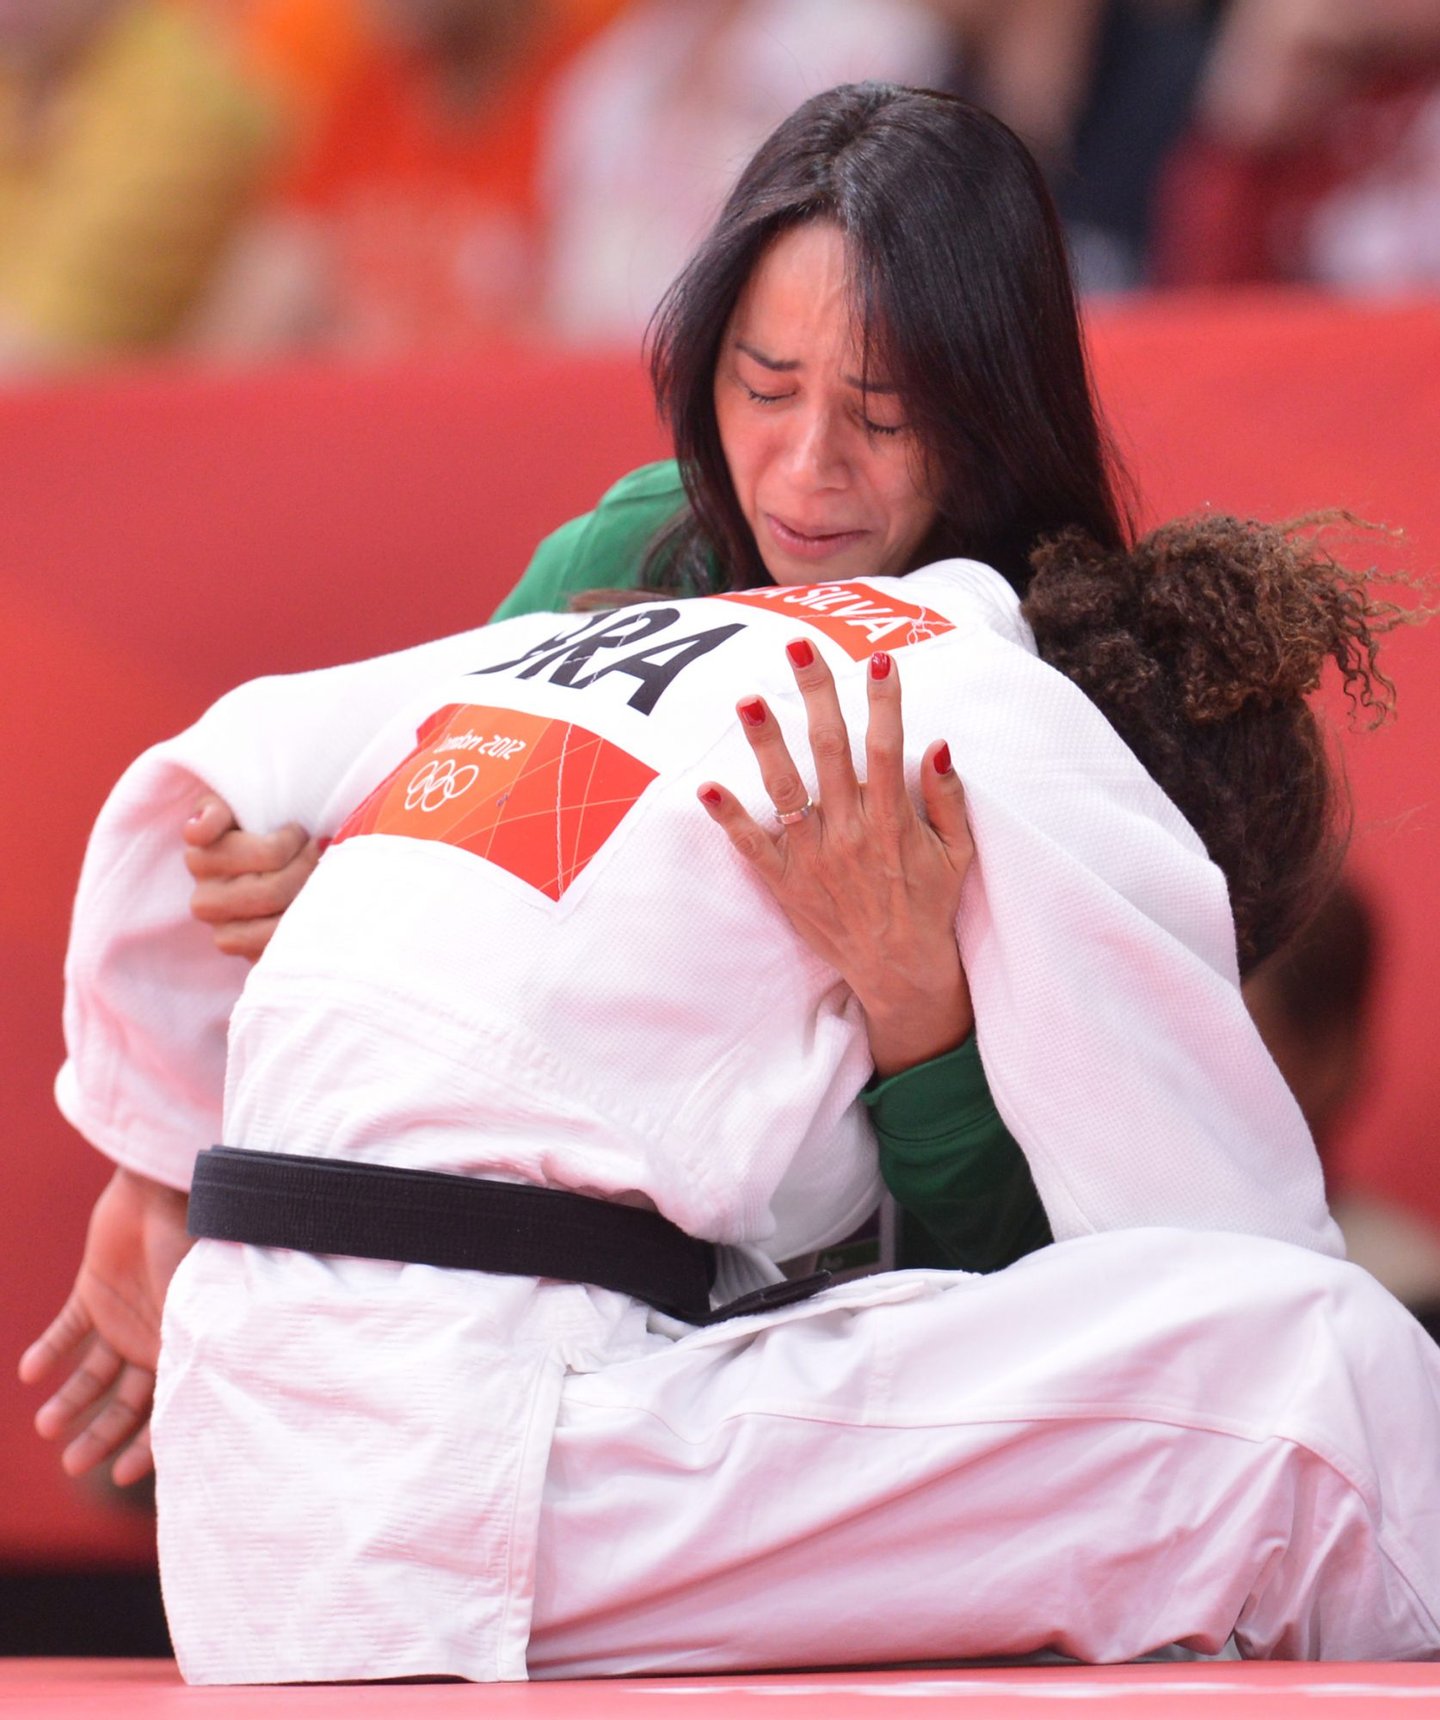 Brazil's Rafaela Silva commissarates with her coach Campos Rosicleia, after losing against Hungary's Hedvig Karakas during their women's -57kg judo contest match of the London 2012 Olympic Games on July 30, 2012 ExCel arena in London. AFP PHOTO / JOHANNES EISELE (Photo credit should read JOHANNES EISELE/AFP/GettyImages)